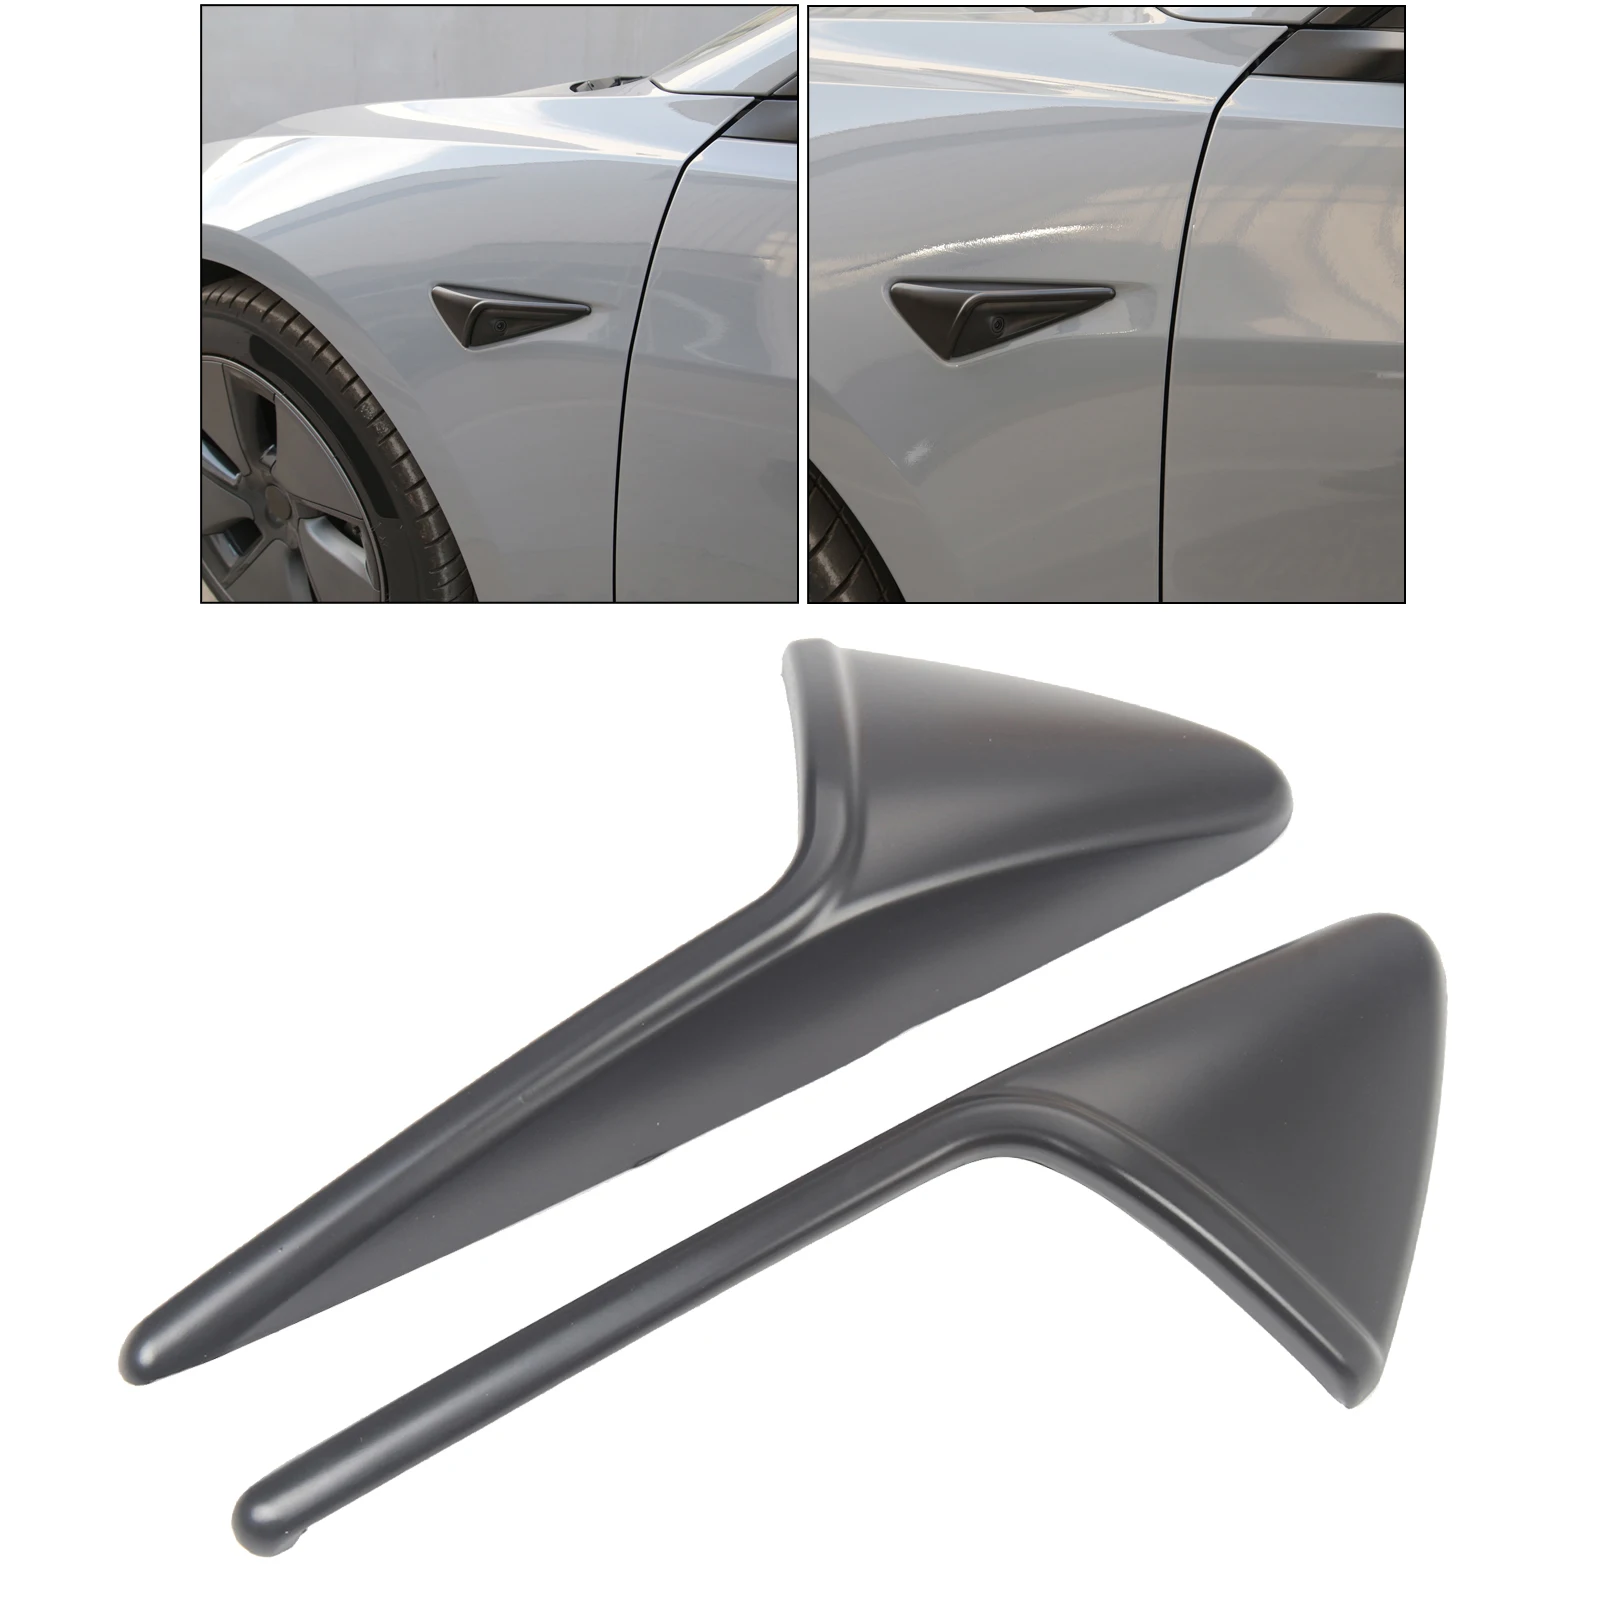 1 Pair Side Camera Protection Cover Fit for Tesla Model 3 2021 Ornaments ABS Car Accessories